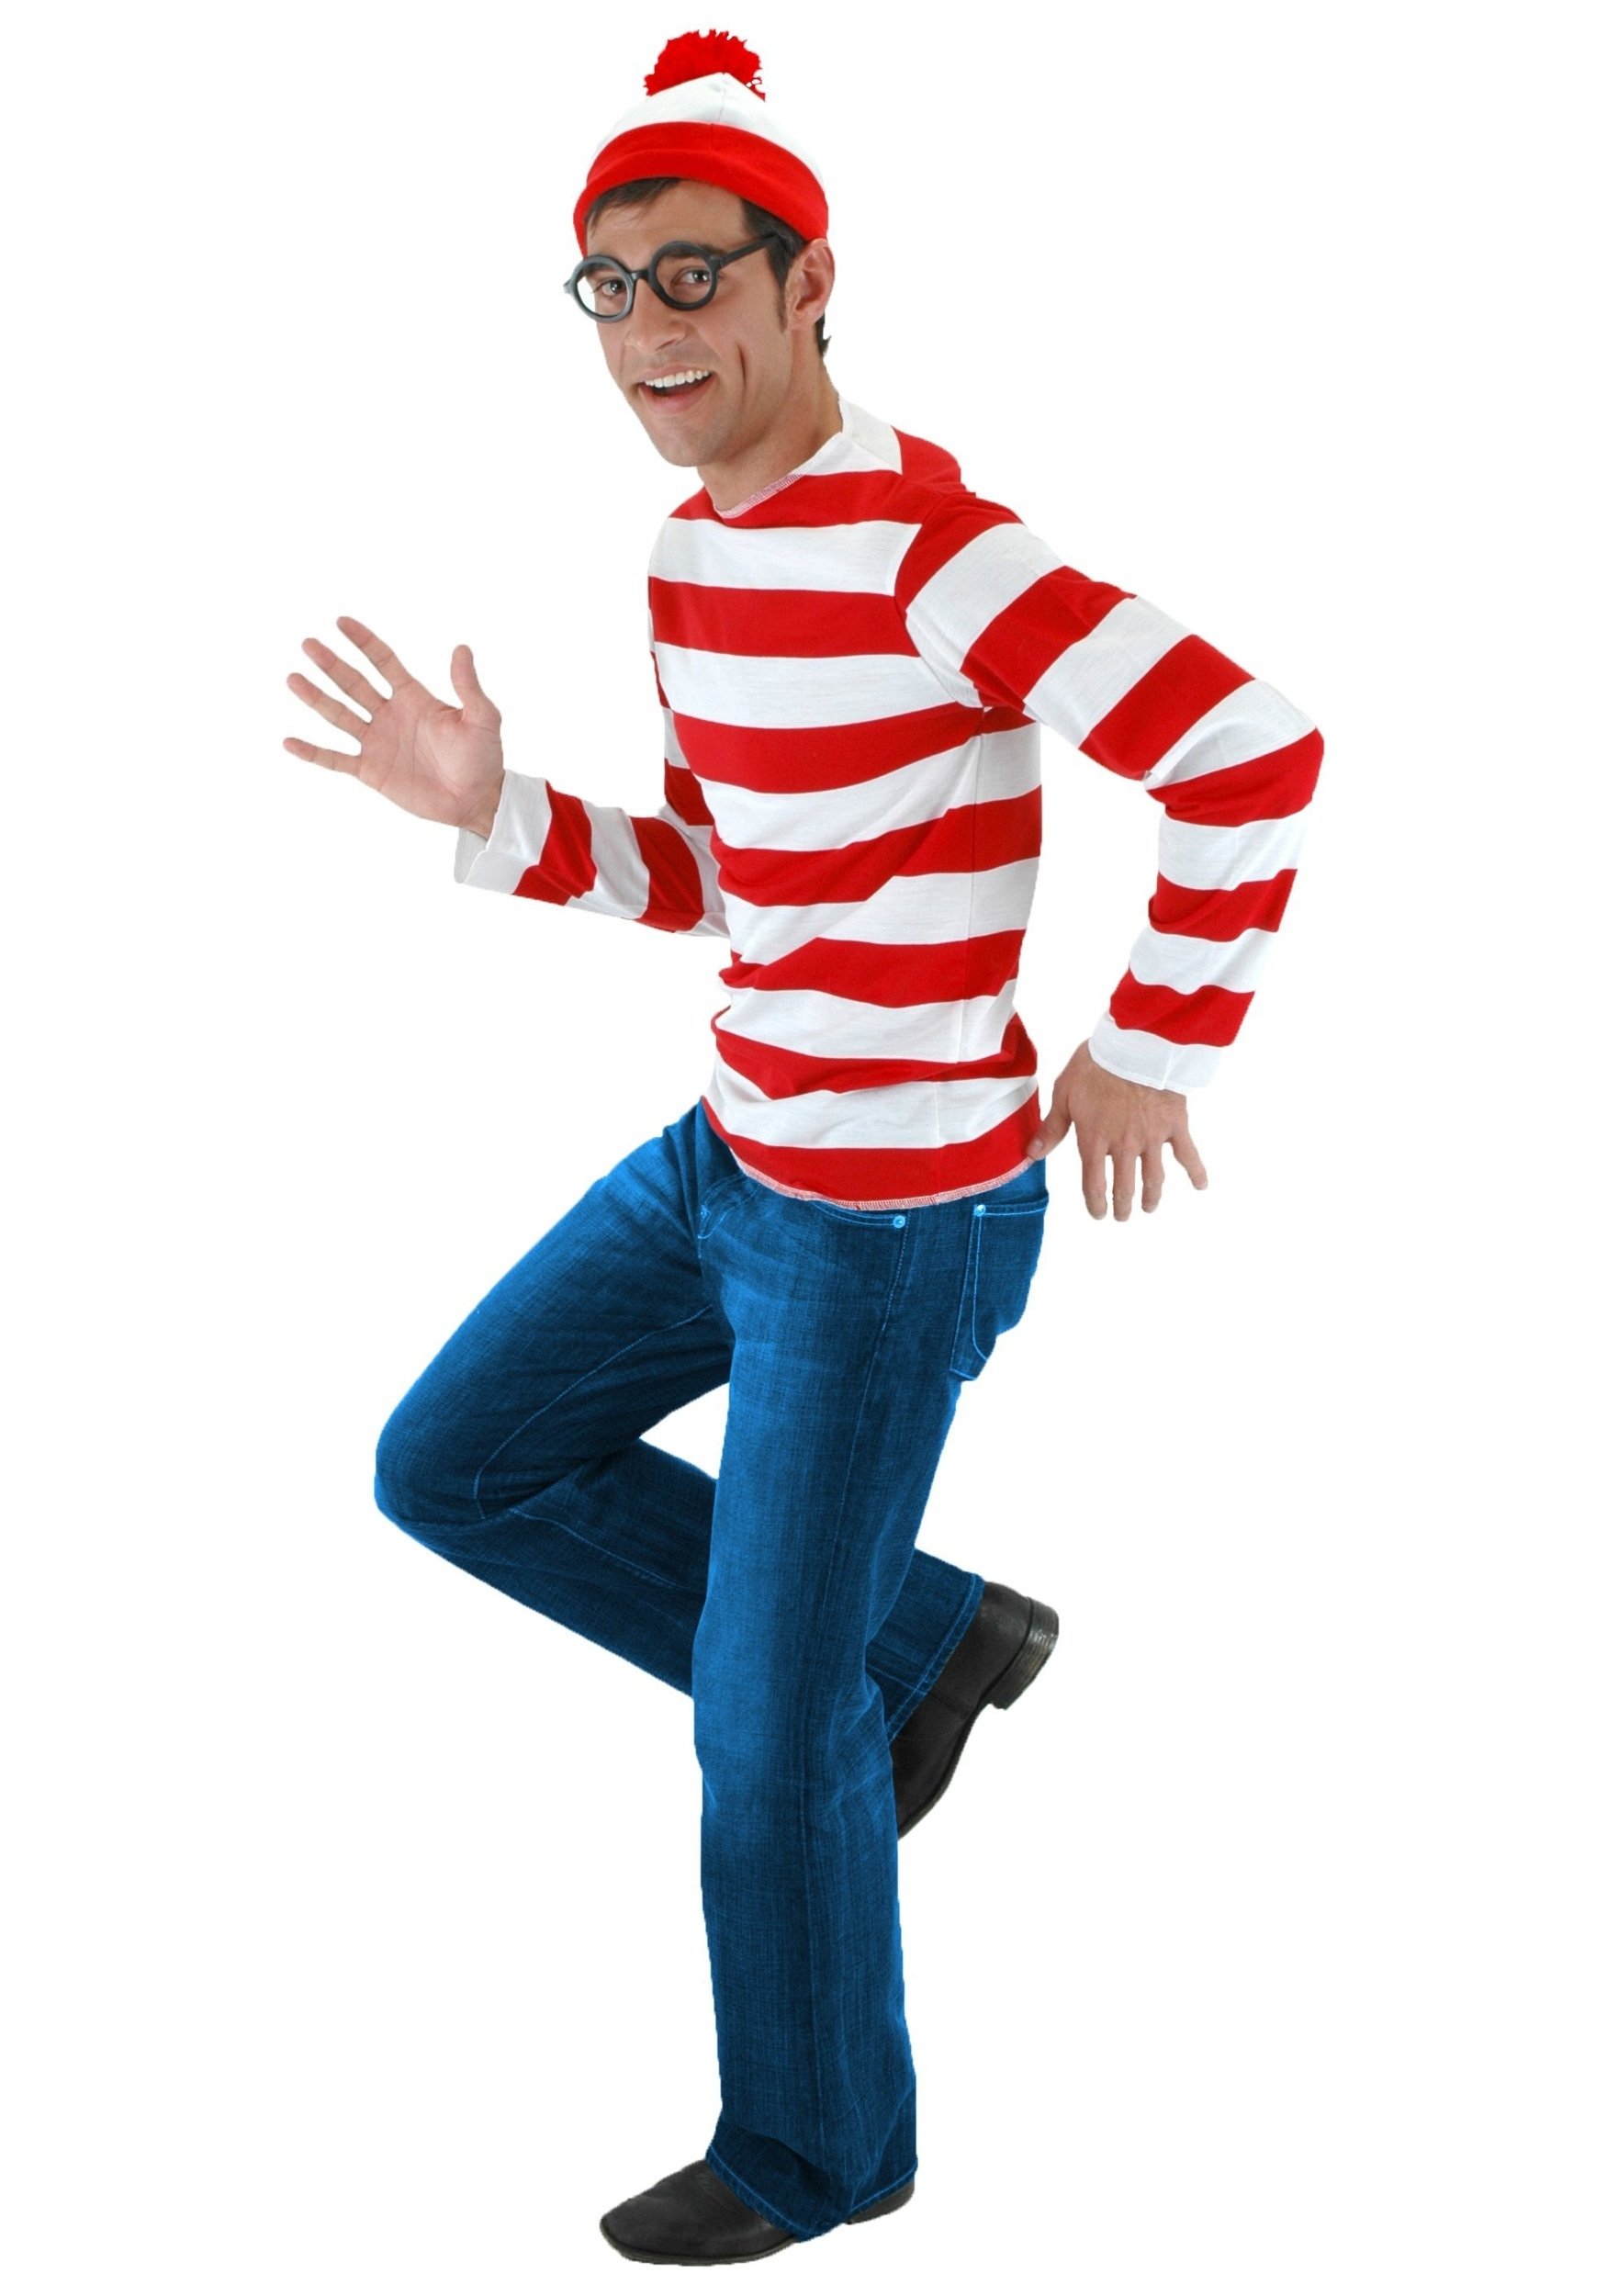 10 Cute Halloween Costumes Ideas For Men wheres waldo costume exclusive sizes available 12 2022